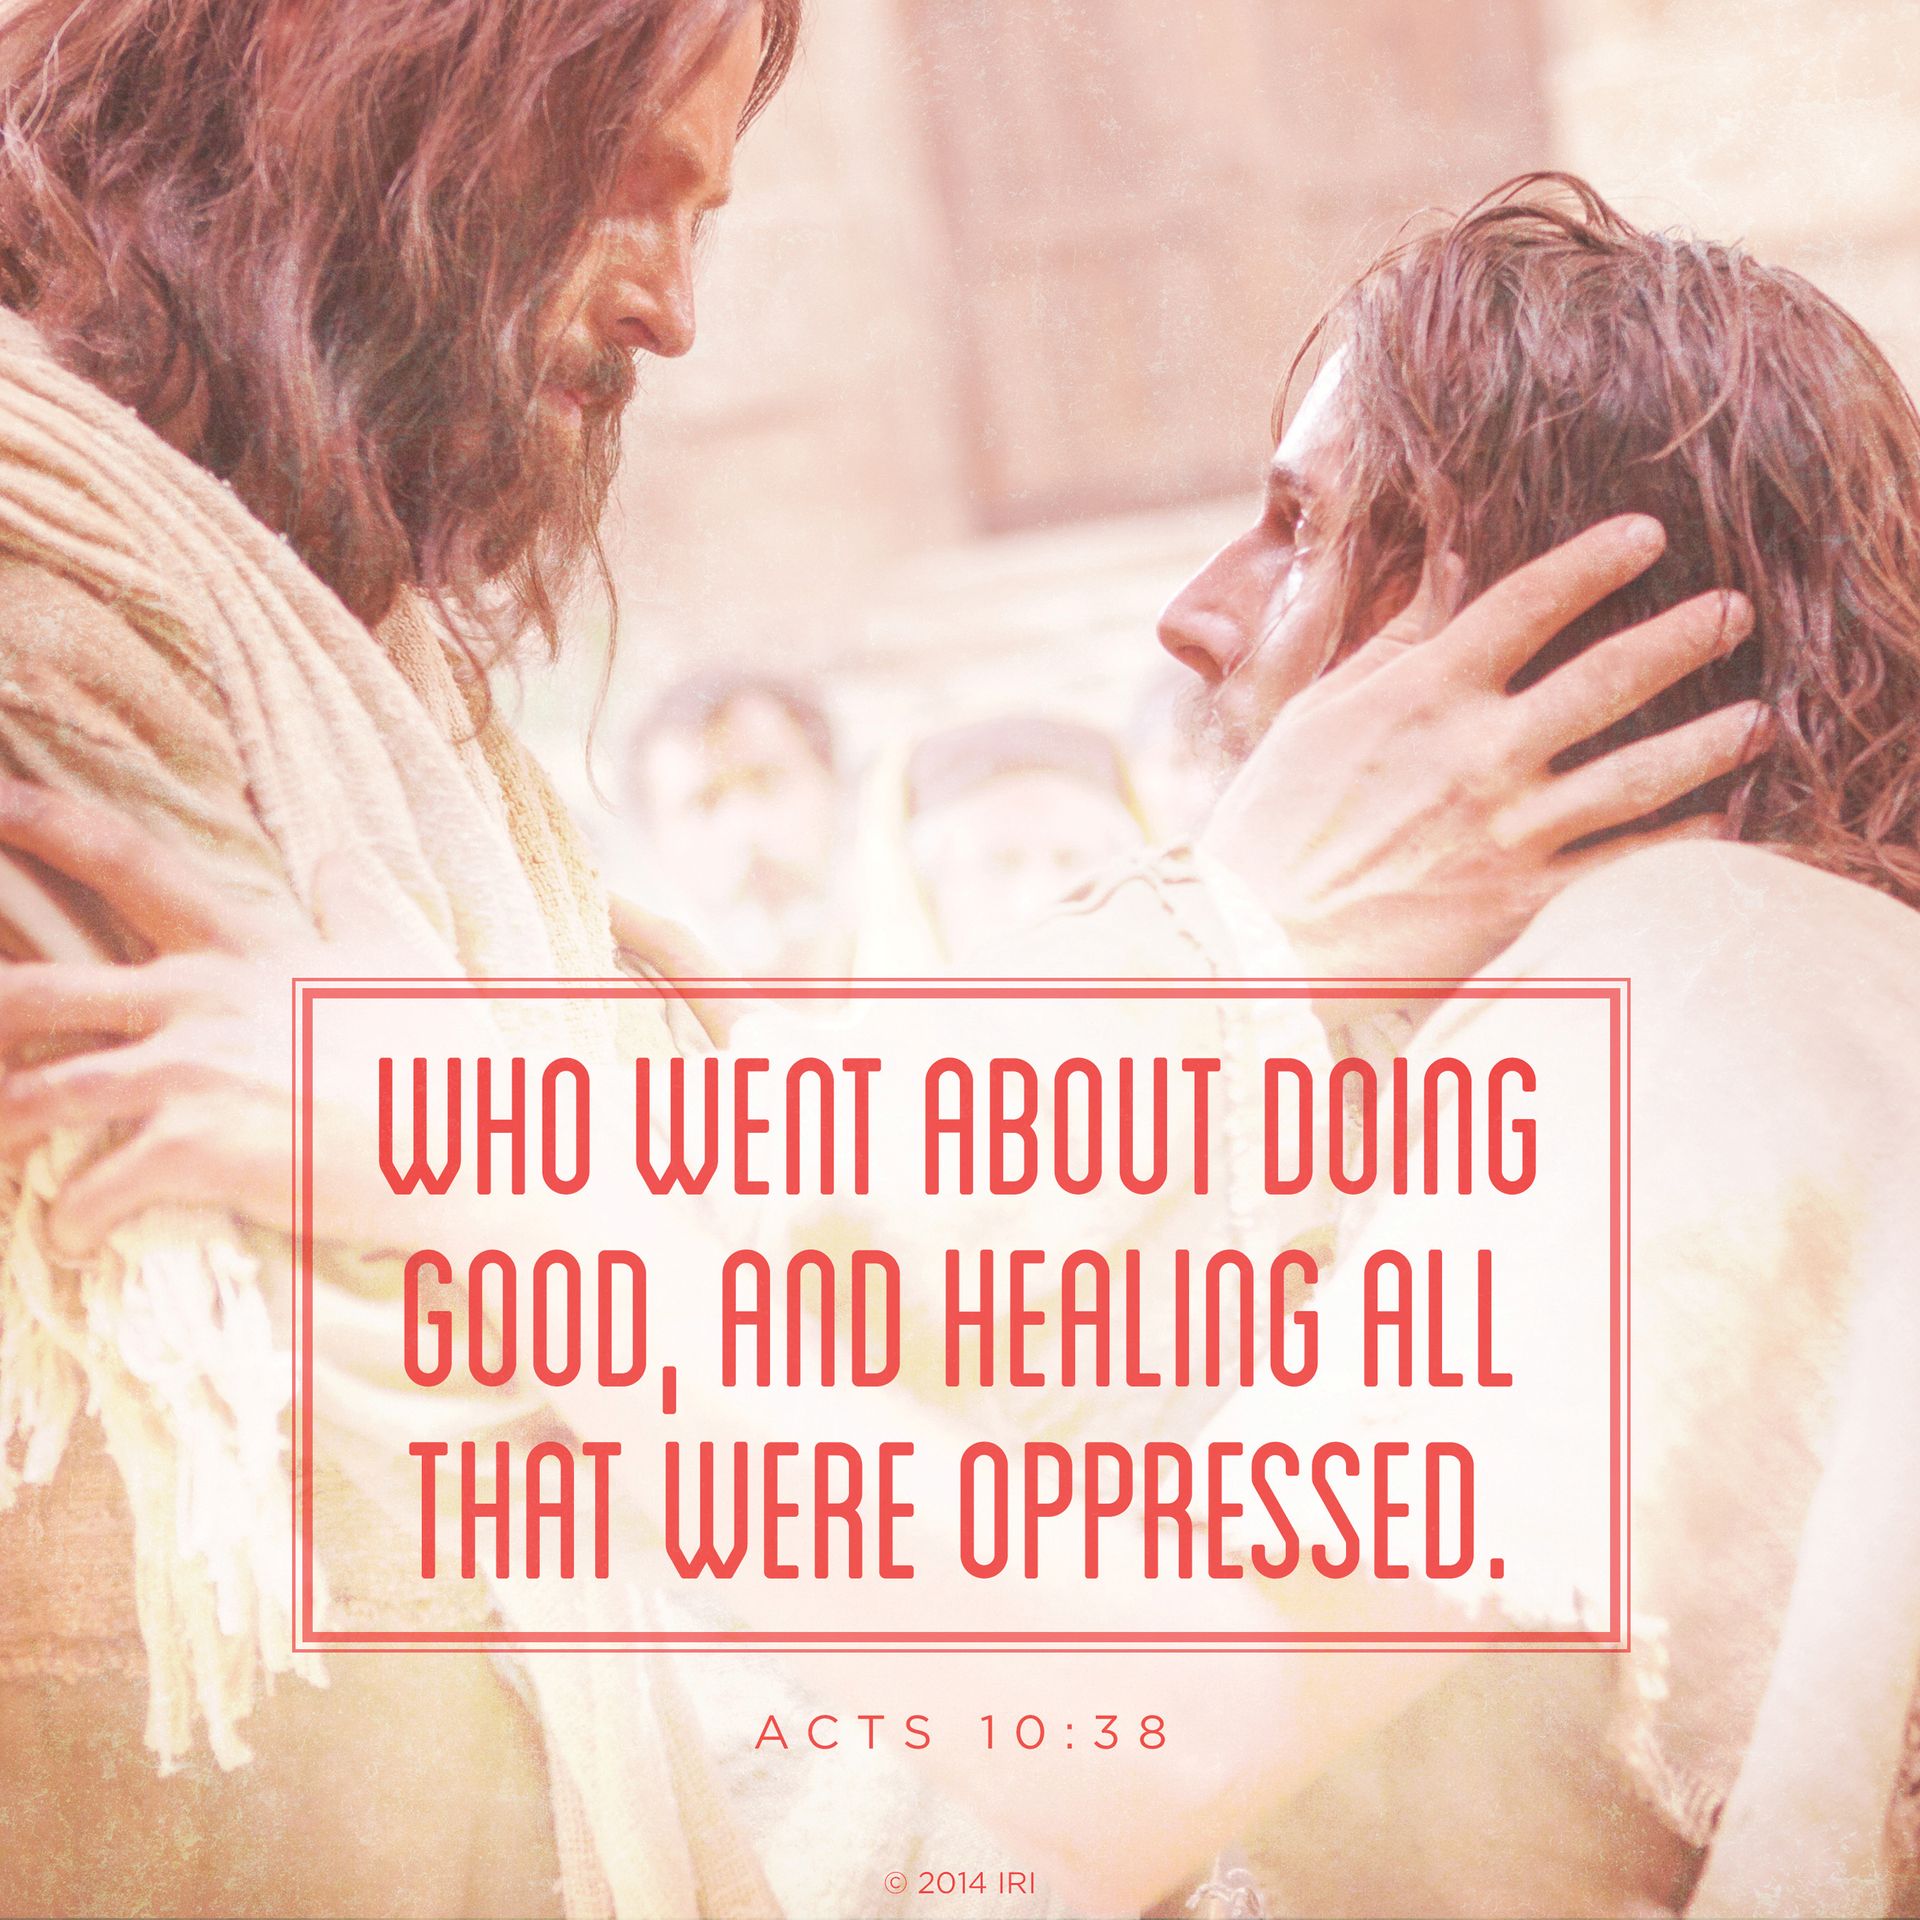 “Who went about doing good, and healing all that were oppressed.”—Acts 10:38